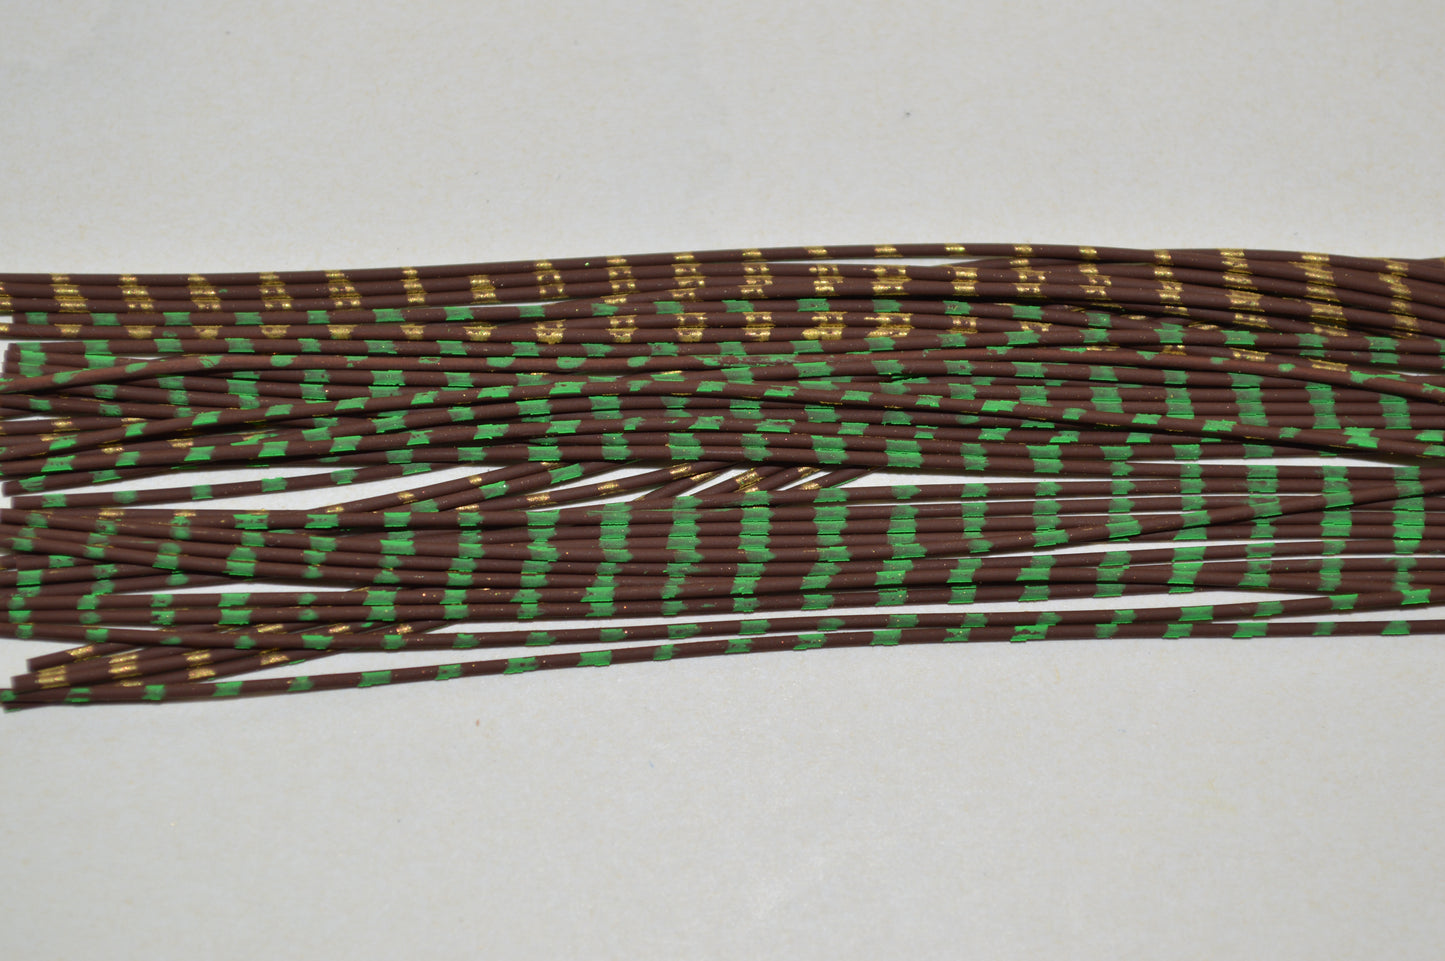 Medium Reptile Rubber Brown with Lime on 1 side and Gold on 1 side-D-04-07